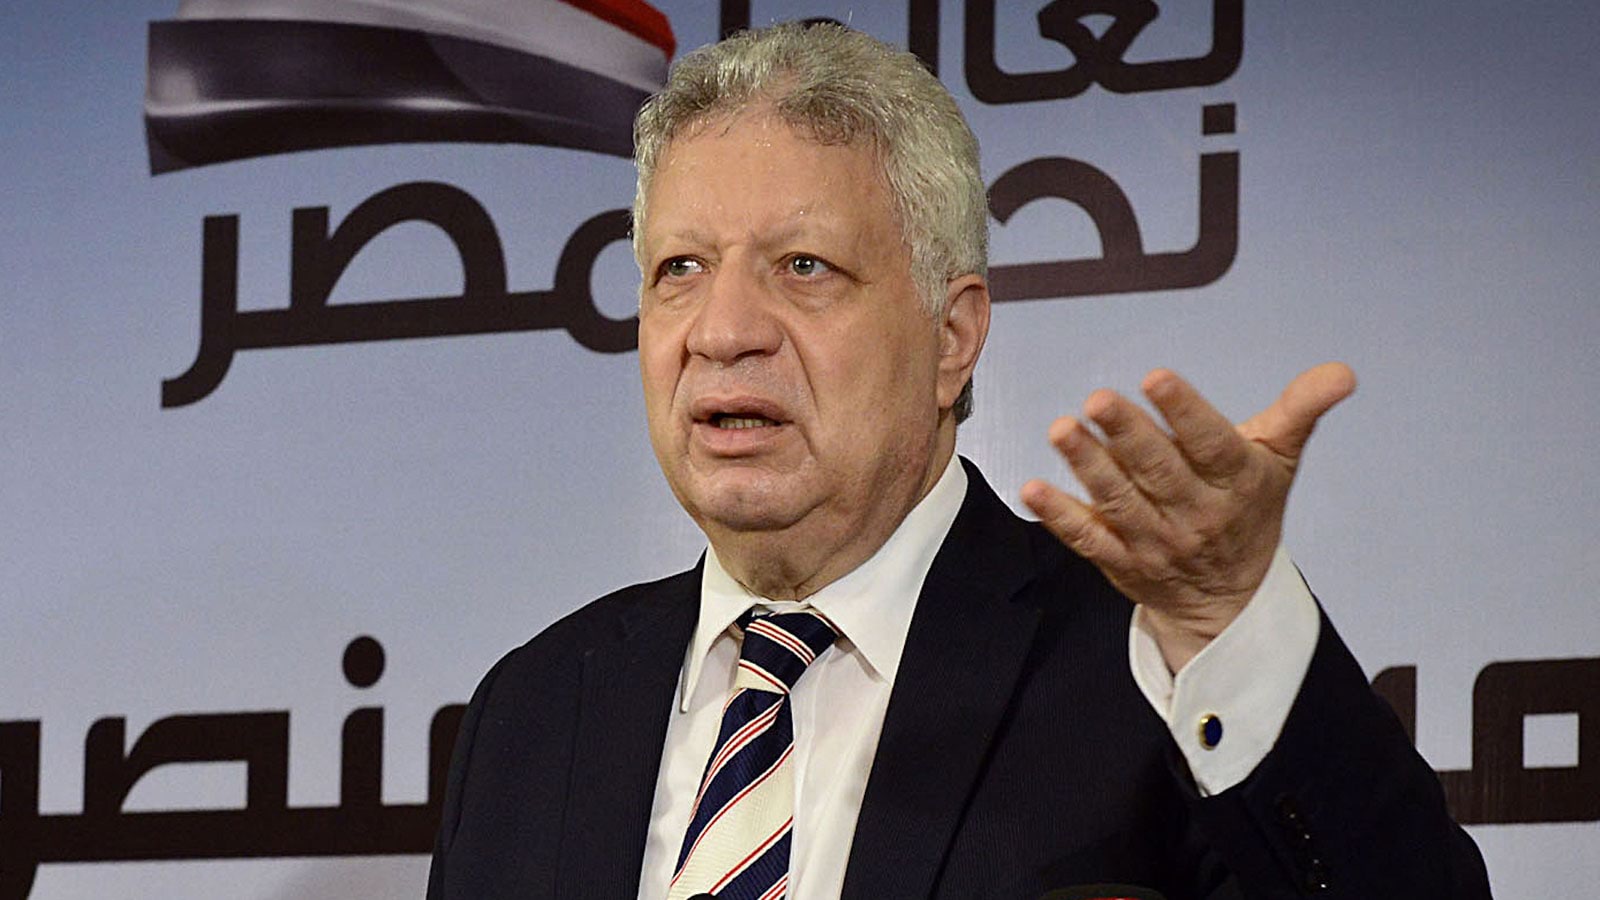 The Egyptian Federation prevents dealing with the president of Zamalek and refers him to the Disciplinary Committee